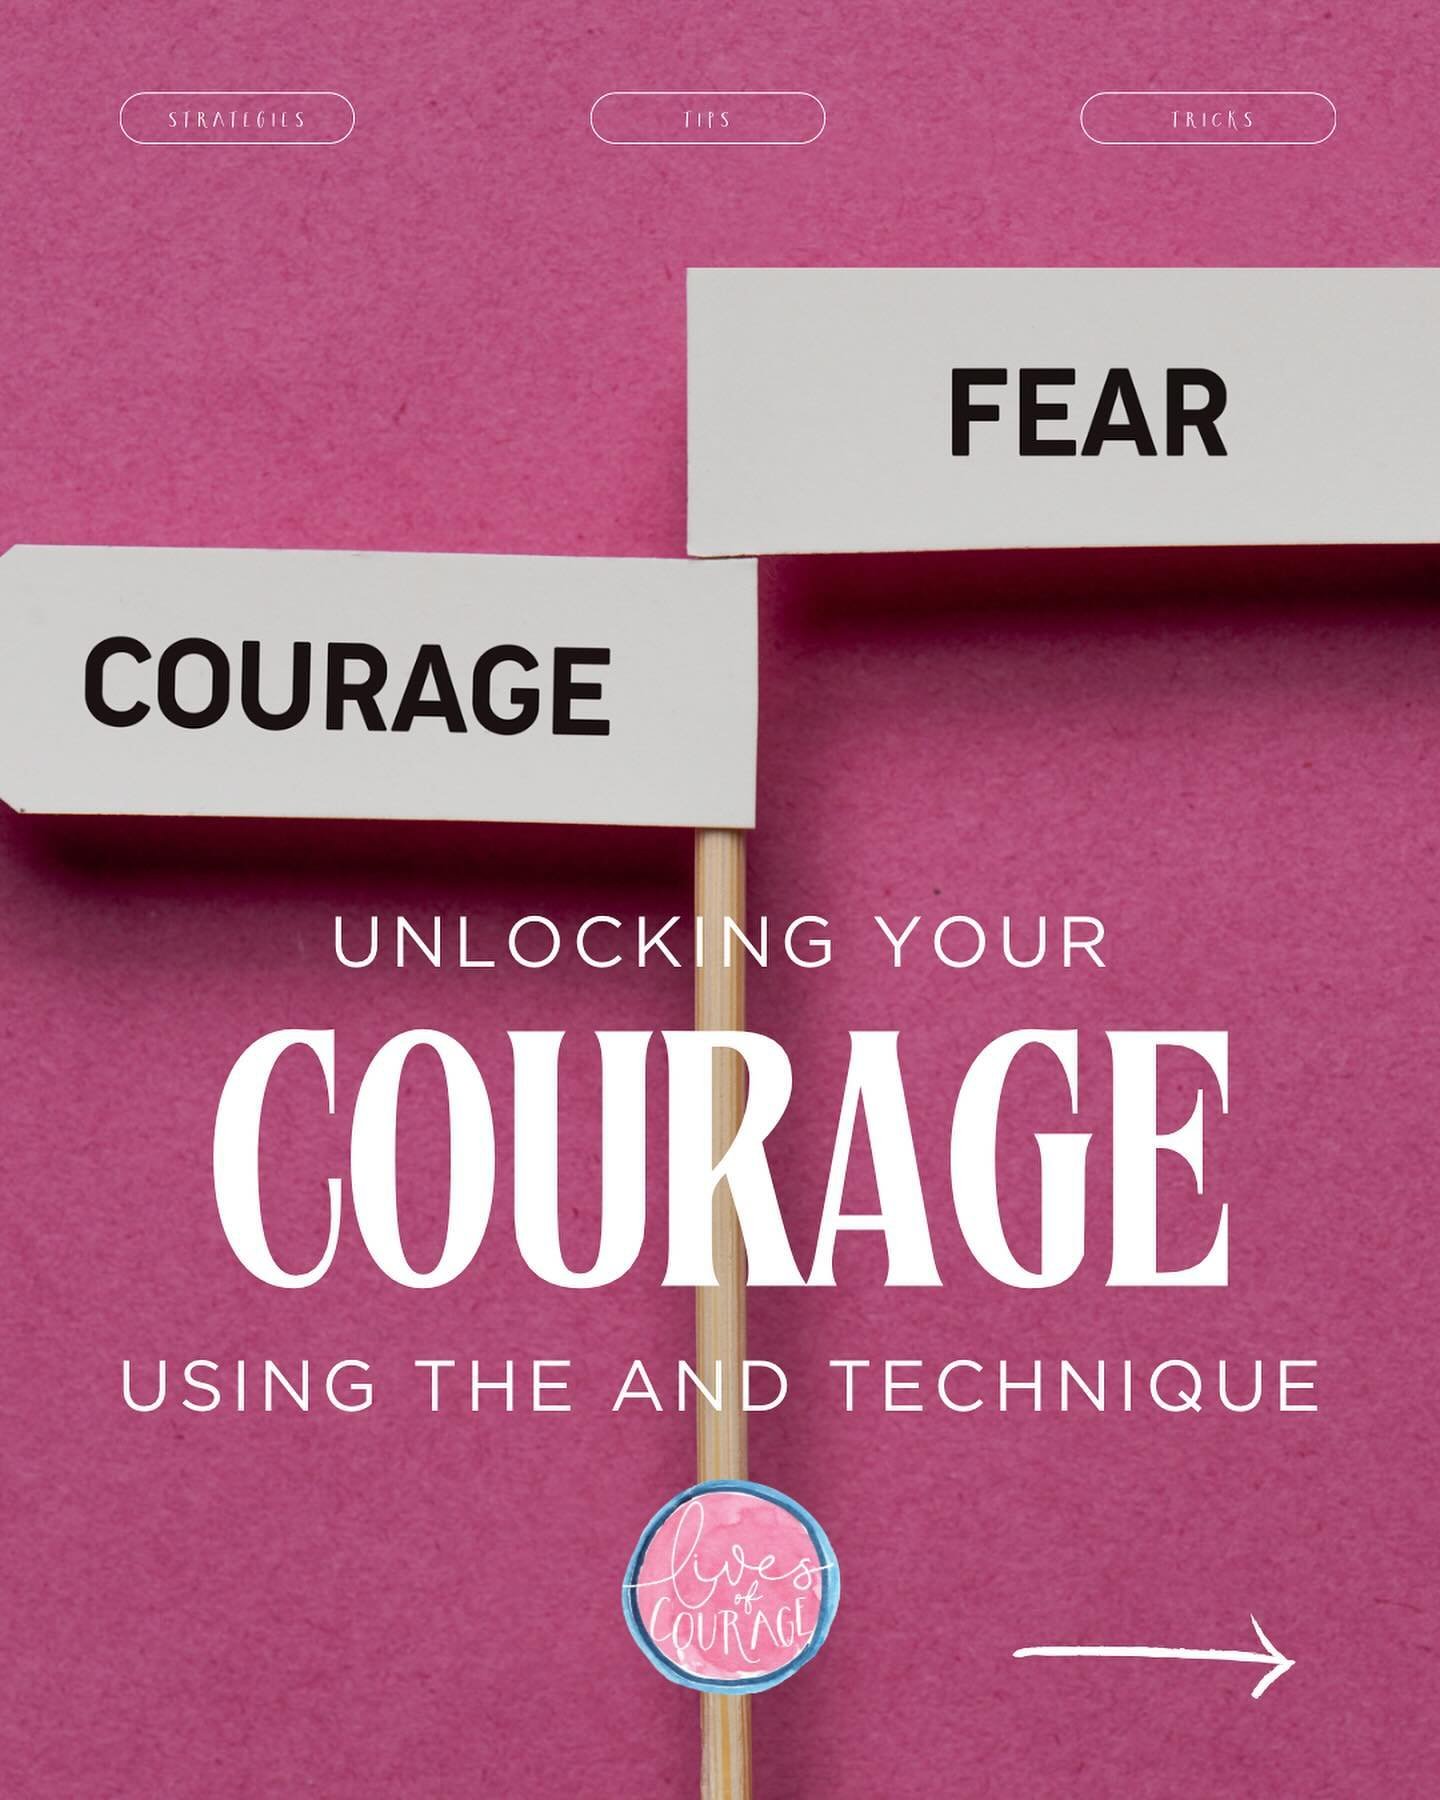 Unlock the power of everyday courage with our step-by-step guide to the AND Technique! 
This carousel takes you through a simple yet impactful method to face your fears and transform them into actionable steps towards growth. Swipe through to learn h